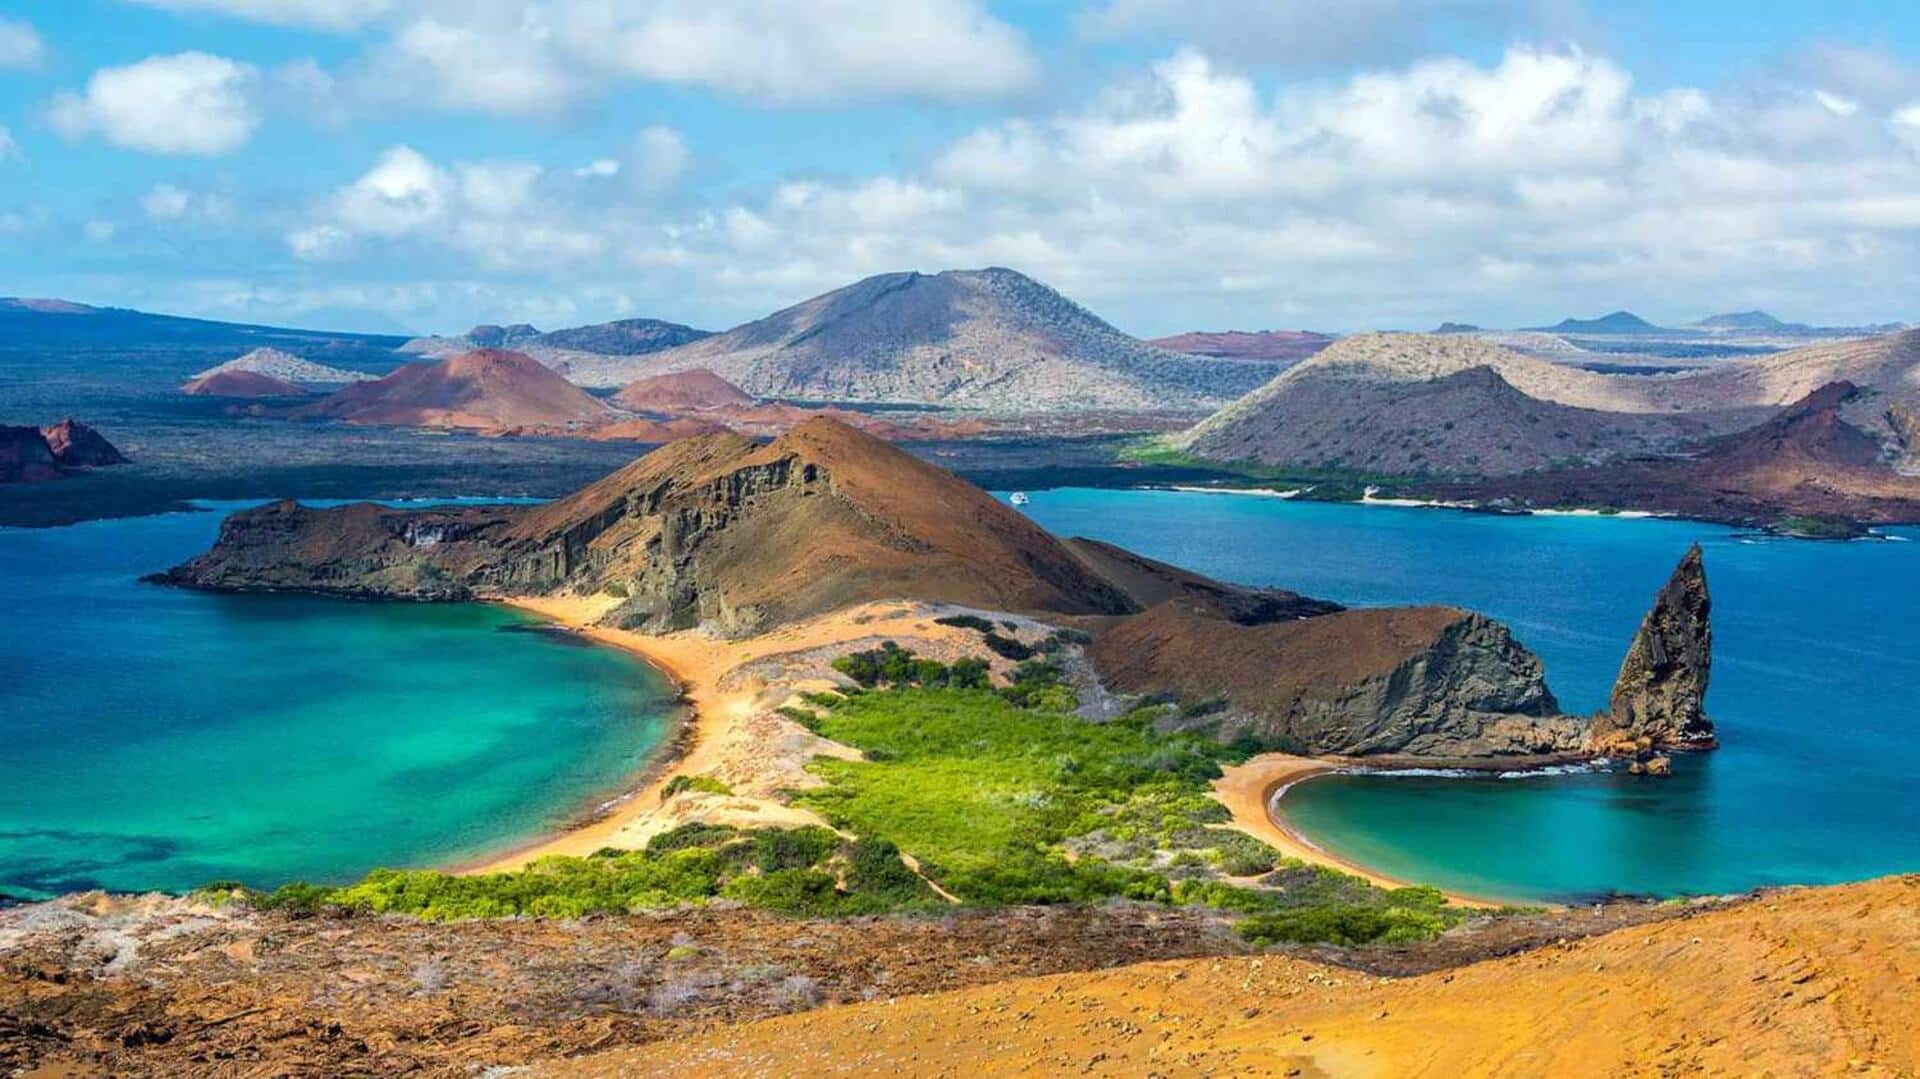 Explore the Galapagos Islands, Ecuador with this things-to-do guide